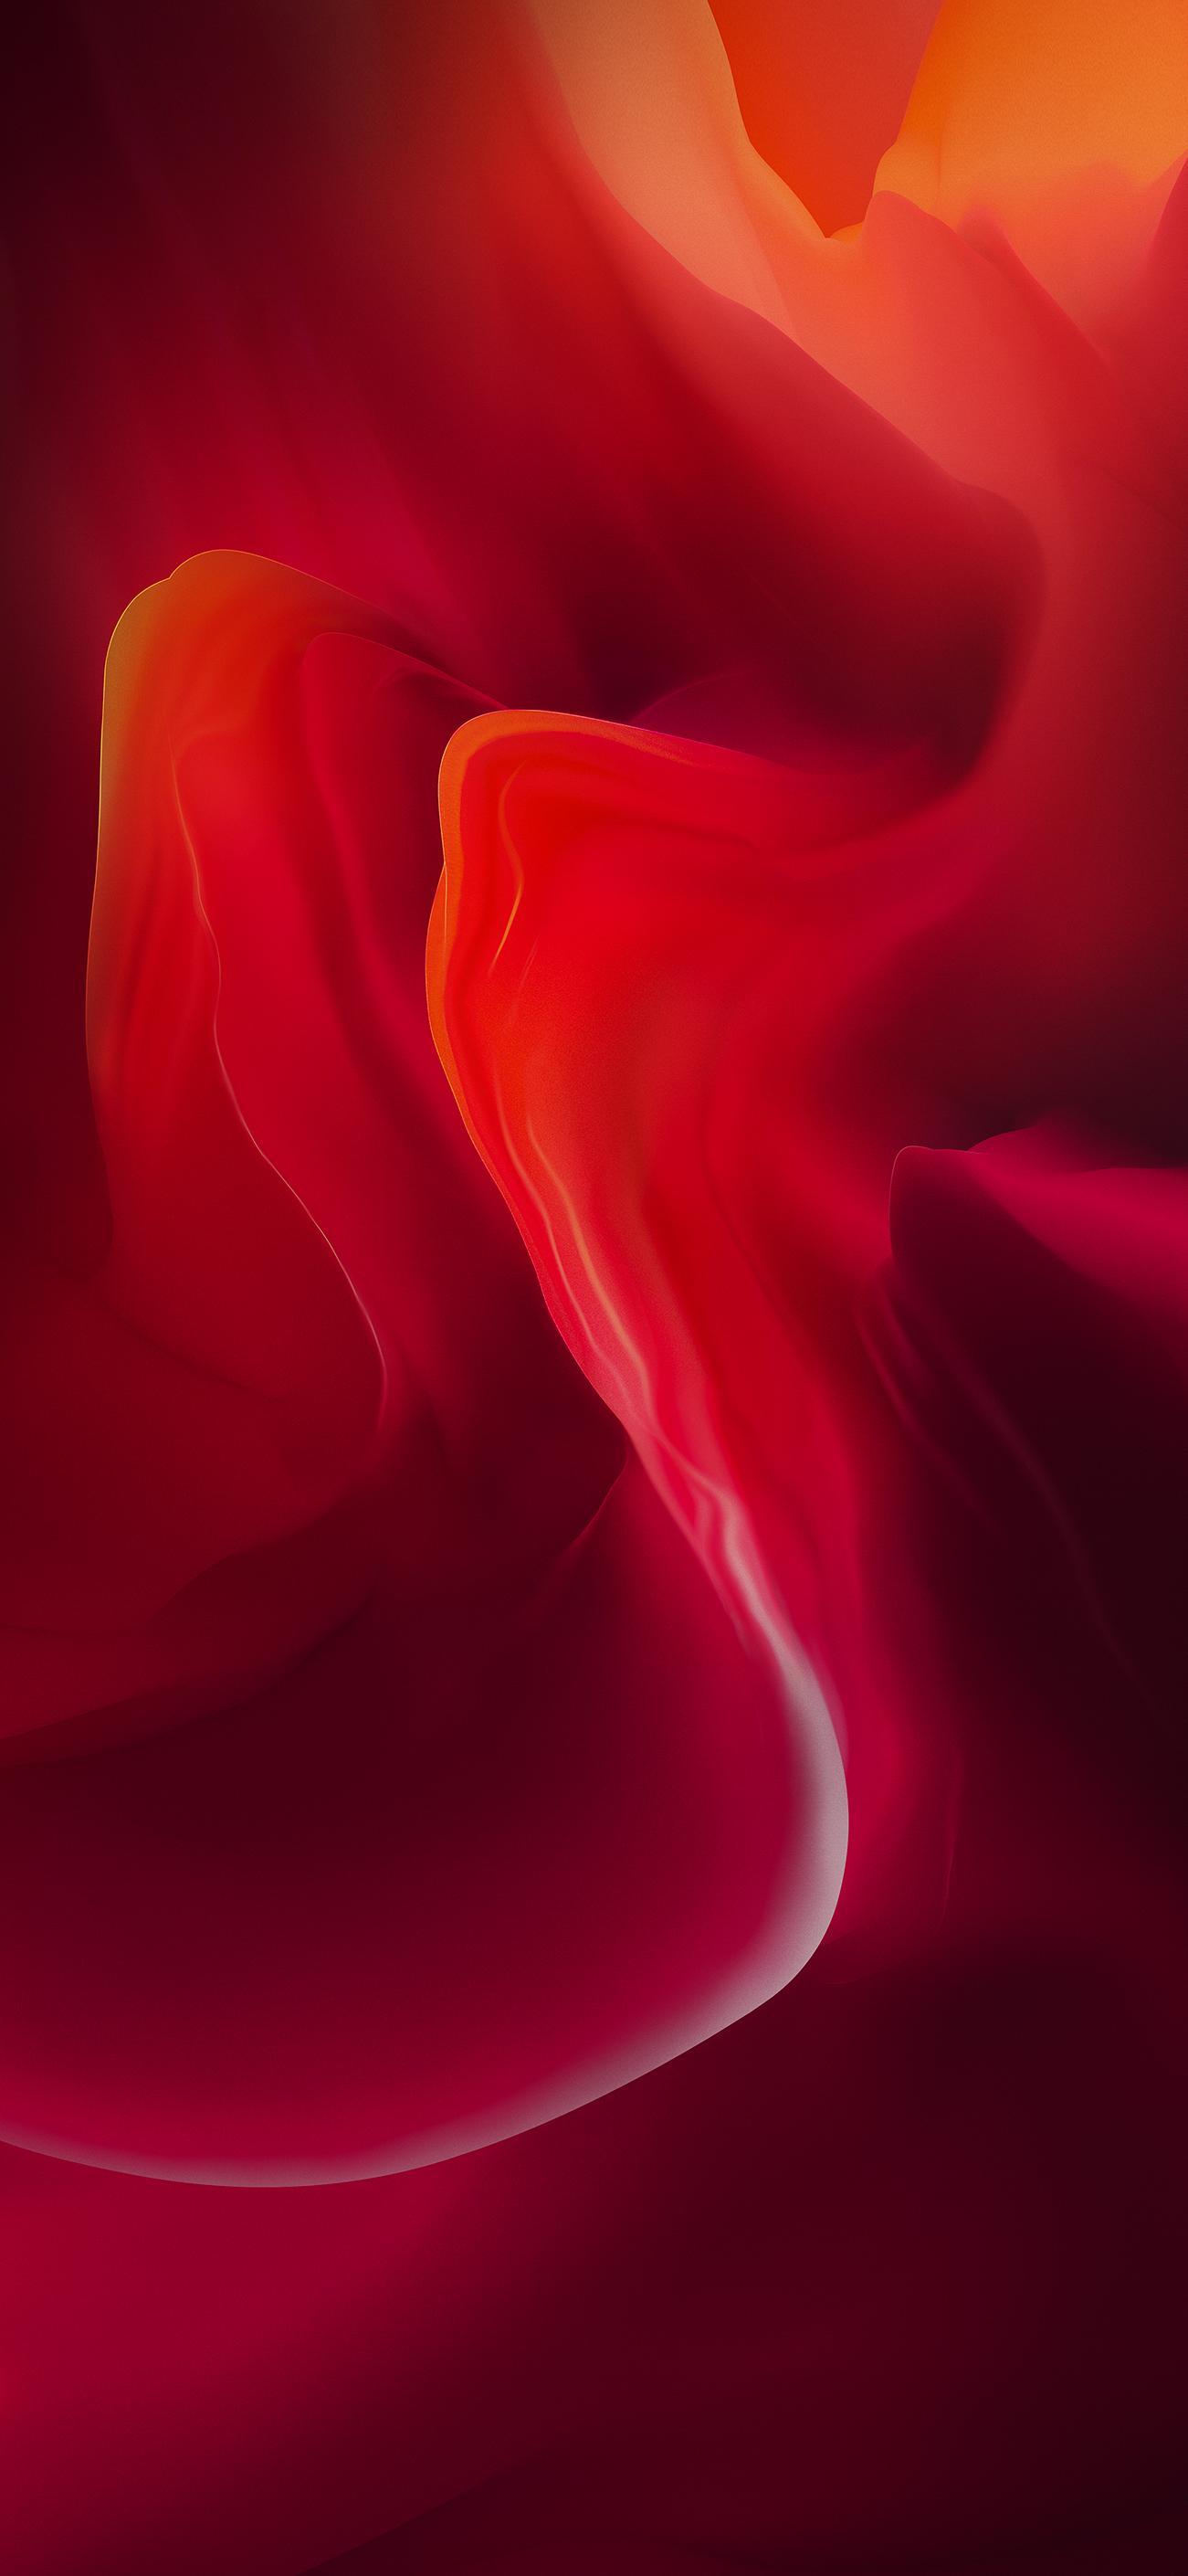 OnePlus 6 Red Stock Wallpaper #Red